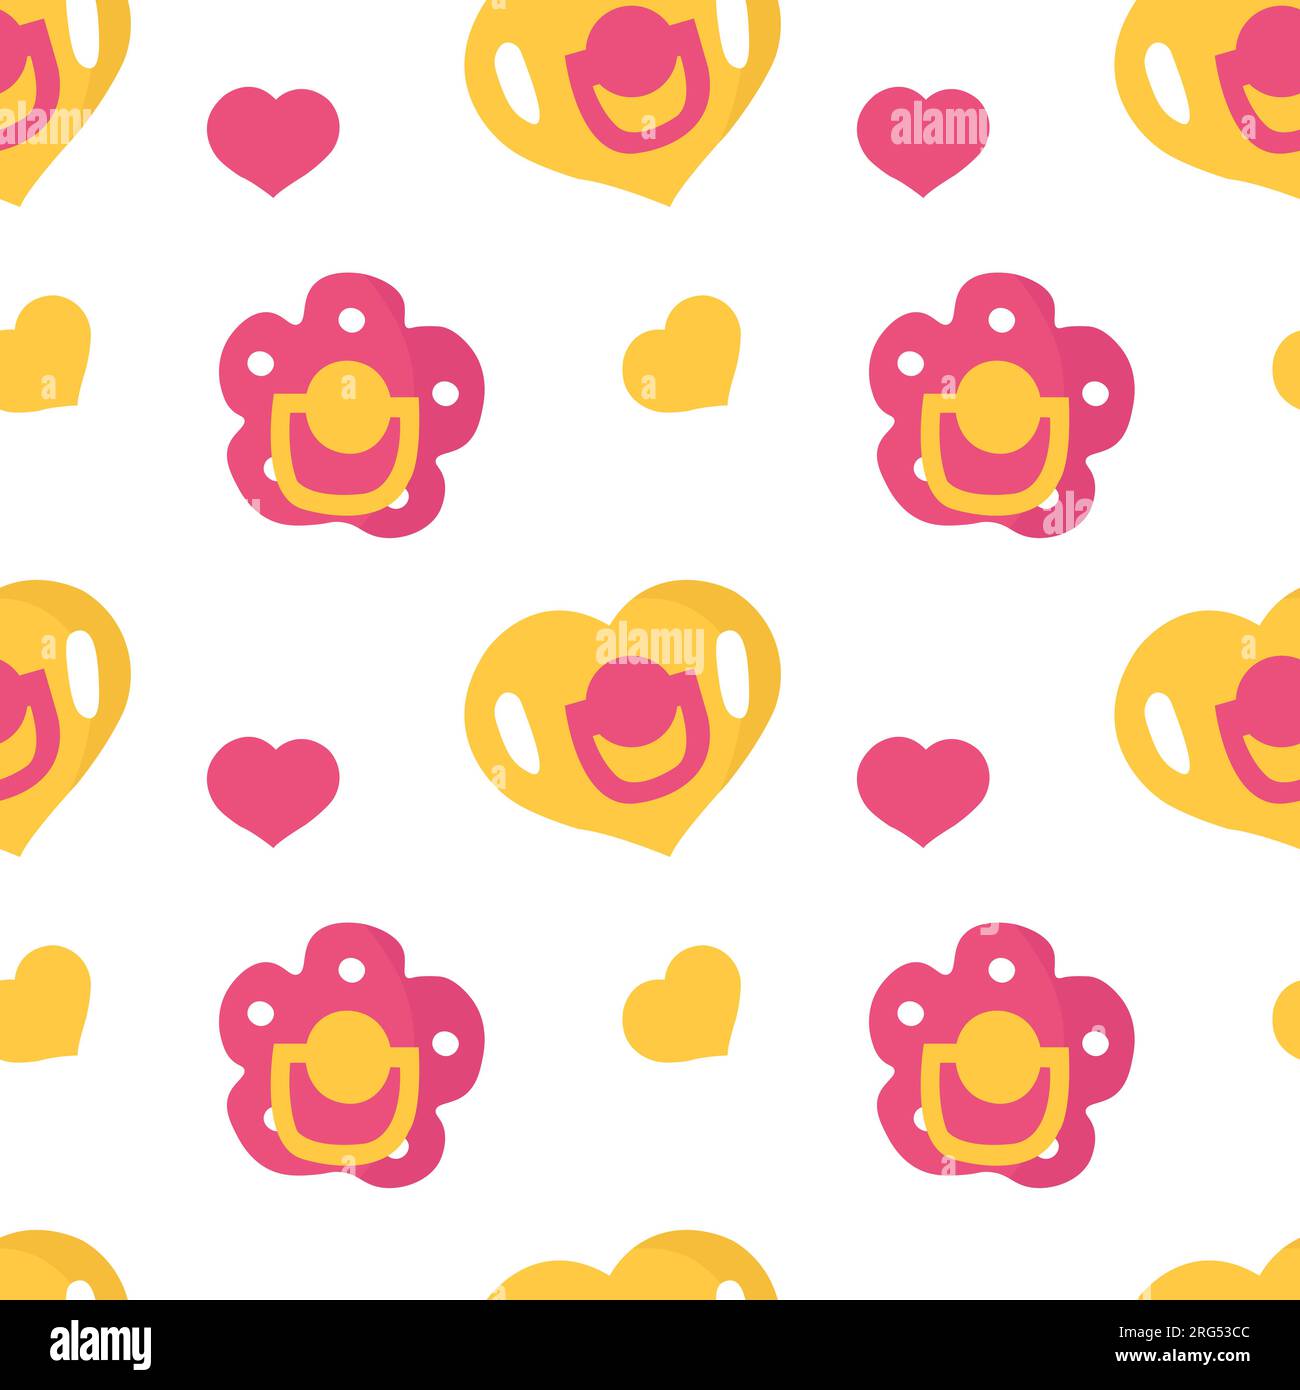 Baby girl floral shape pacifiers seamless pattern. Baby pacifiers pink and yellow background. Stock Vector